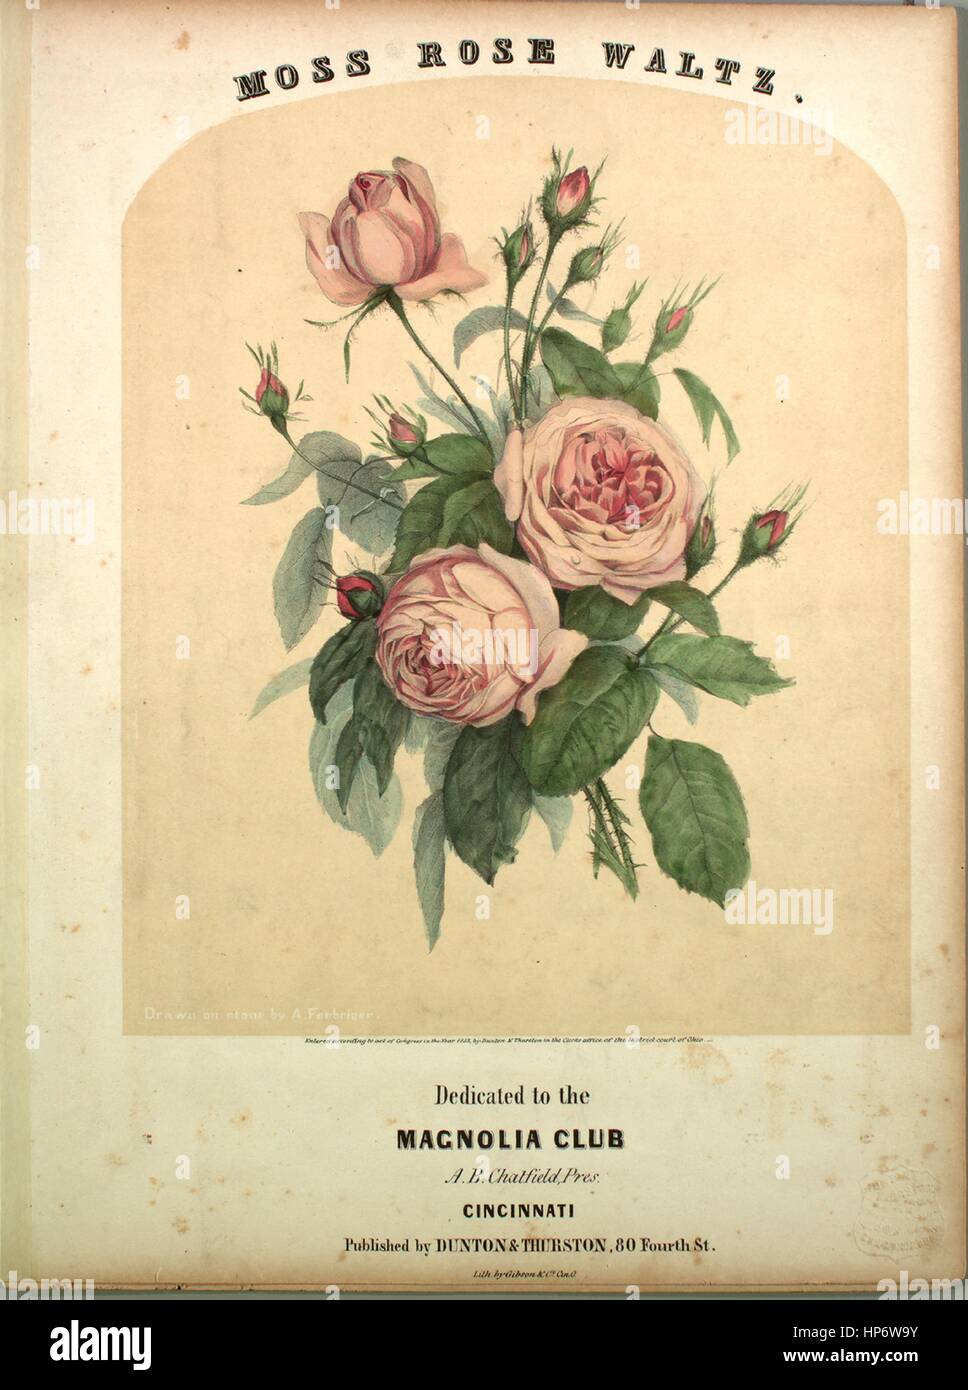 Sheet music cover image of the song 'Moss Rose Waltz', with original authorship notes reading 'Arranged by Thos Atkins', United States, 1853. The publisher is listed as 'Dunton and Thurston, 80 Fourth St.', the form of composition is 'sectional', the instrumentation is 'piano', the first line reads 'None', and the illustration artist is listed as 'Drawn on stone by A. Forbriger; Lith. by Gibson and Co. Cin. O.'. Stock Photo